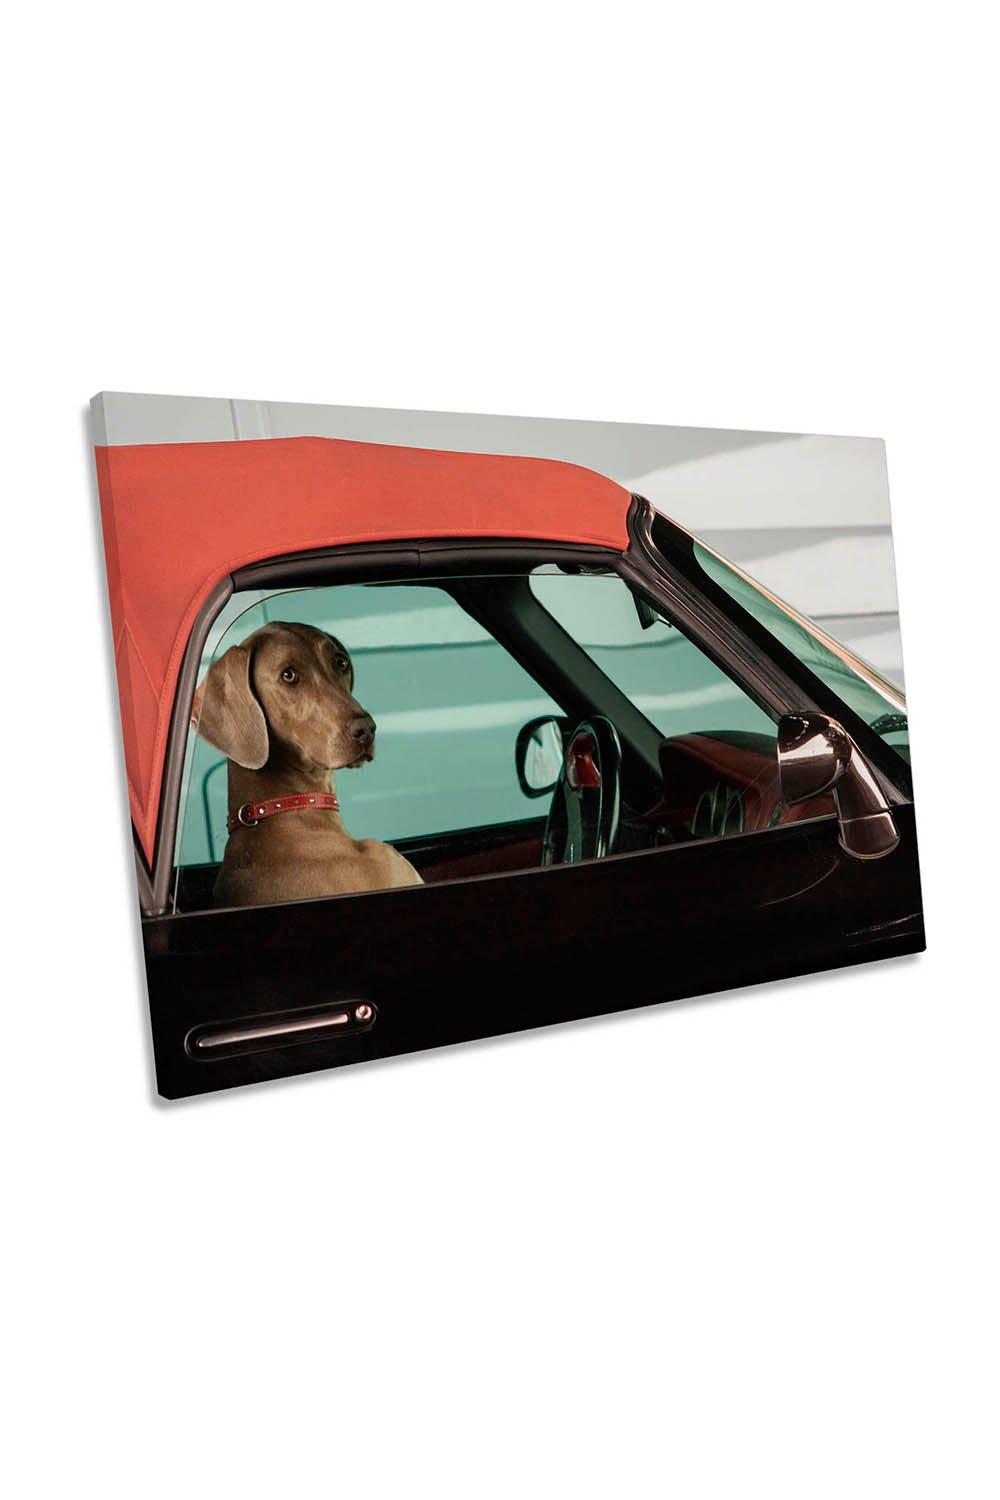 Lady Driver Dog Car Humour Canvas Wall Art Picture Print